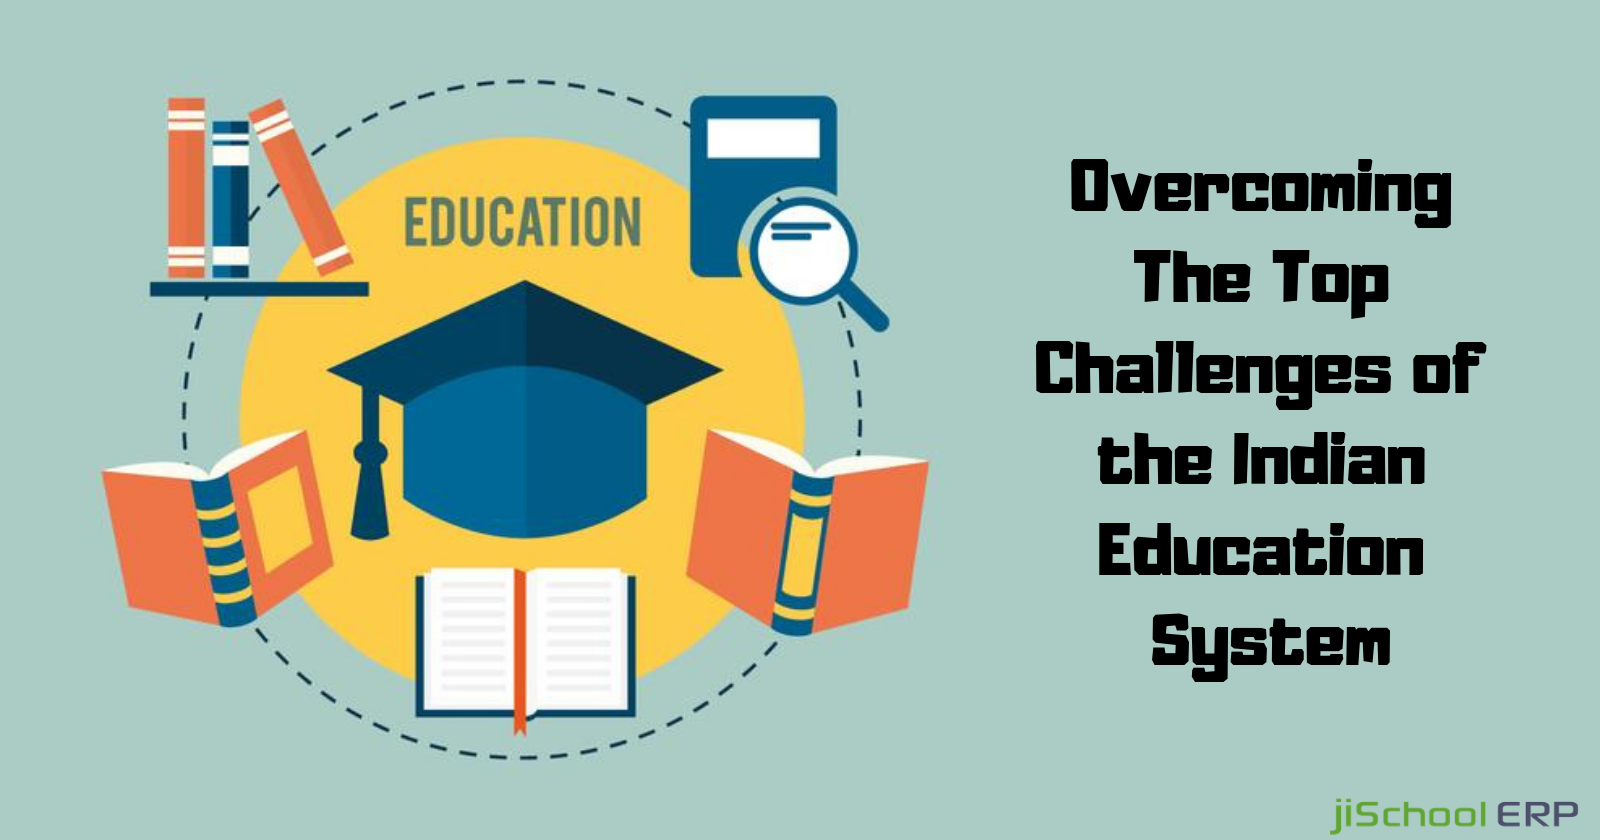 Top Challenges in the Indian Education System & Overcoming Them